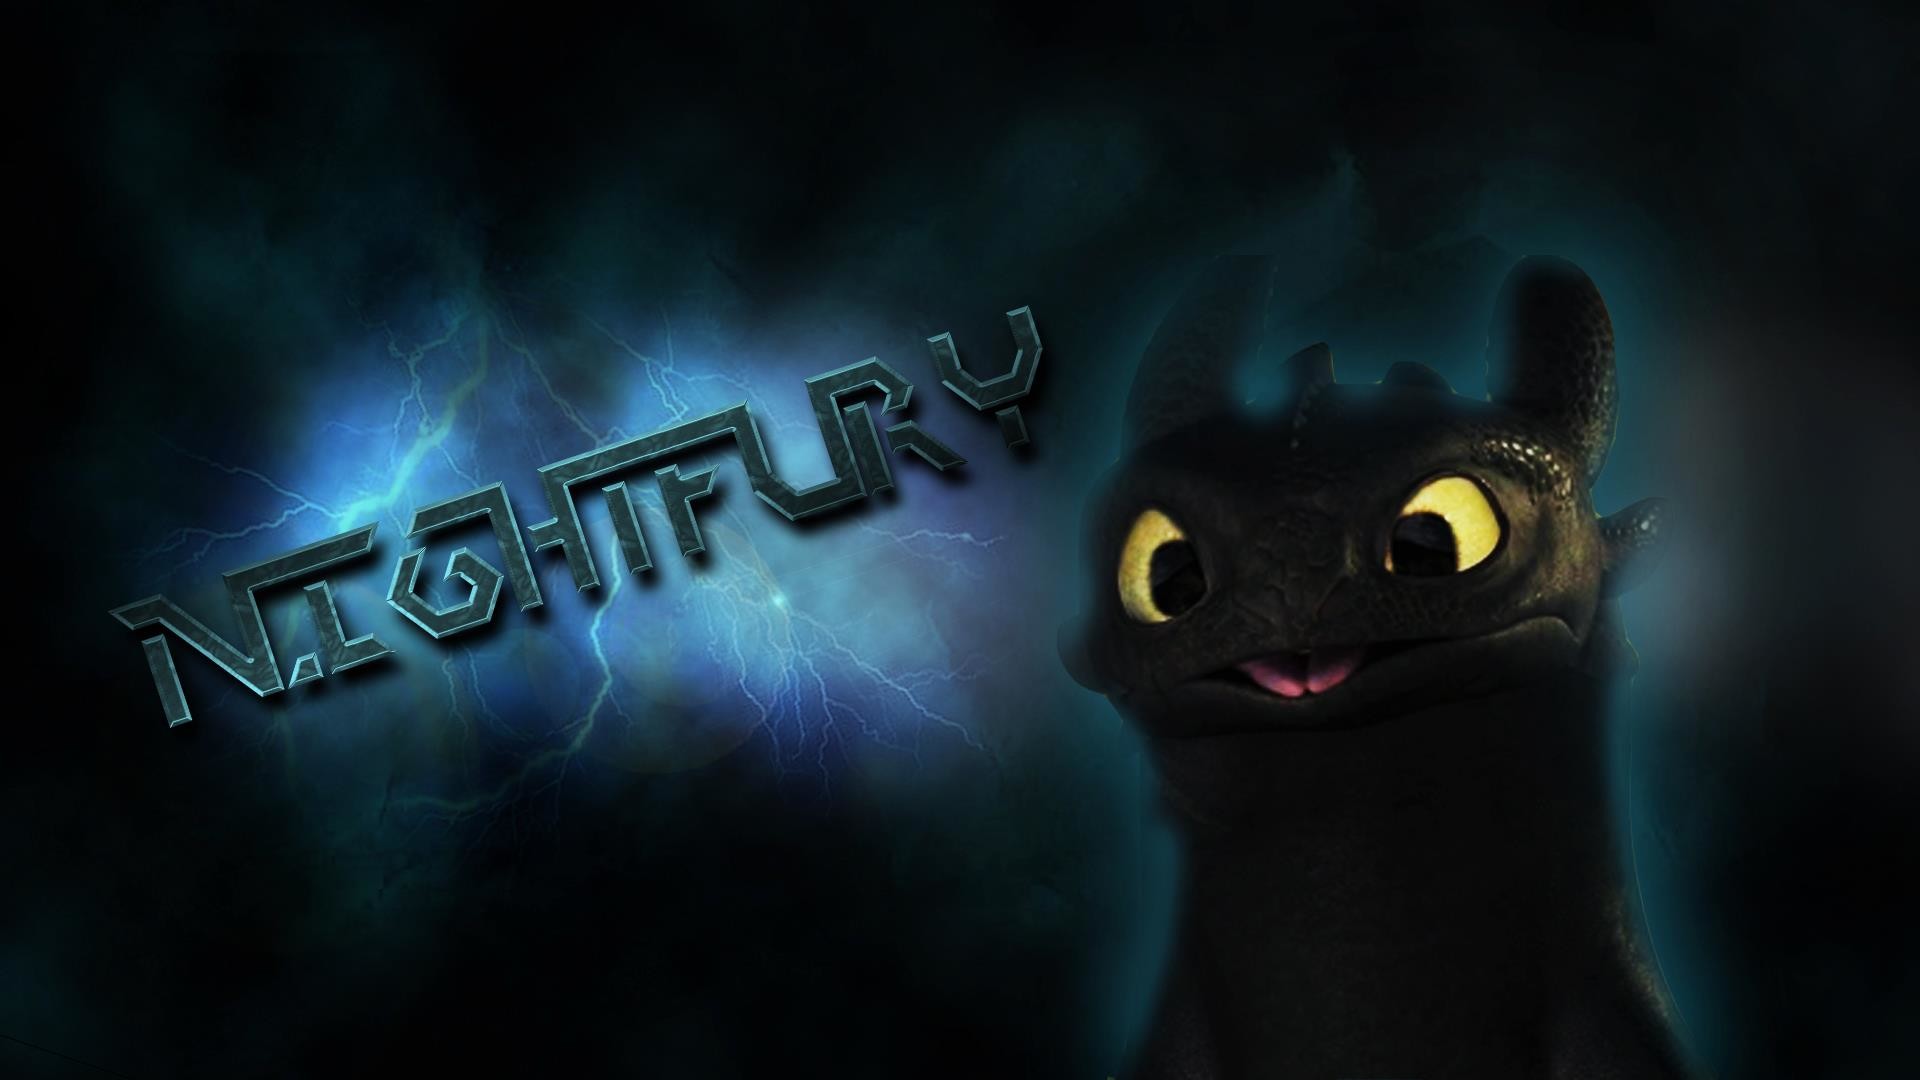 Request Night Fury Toothless Wallpaper by BlueDragonHans on DeviantArt